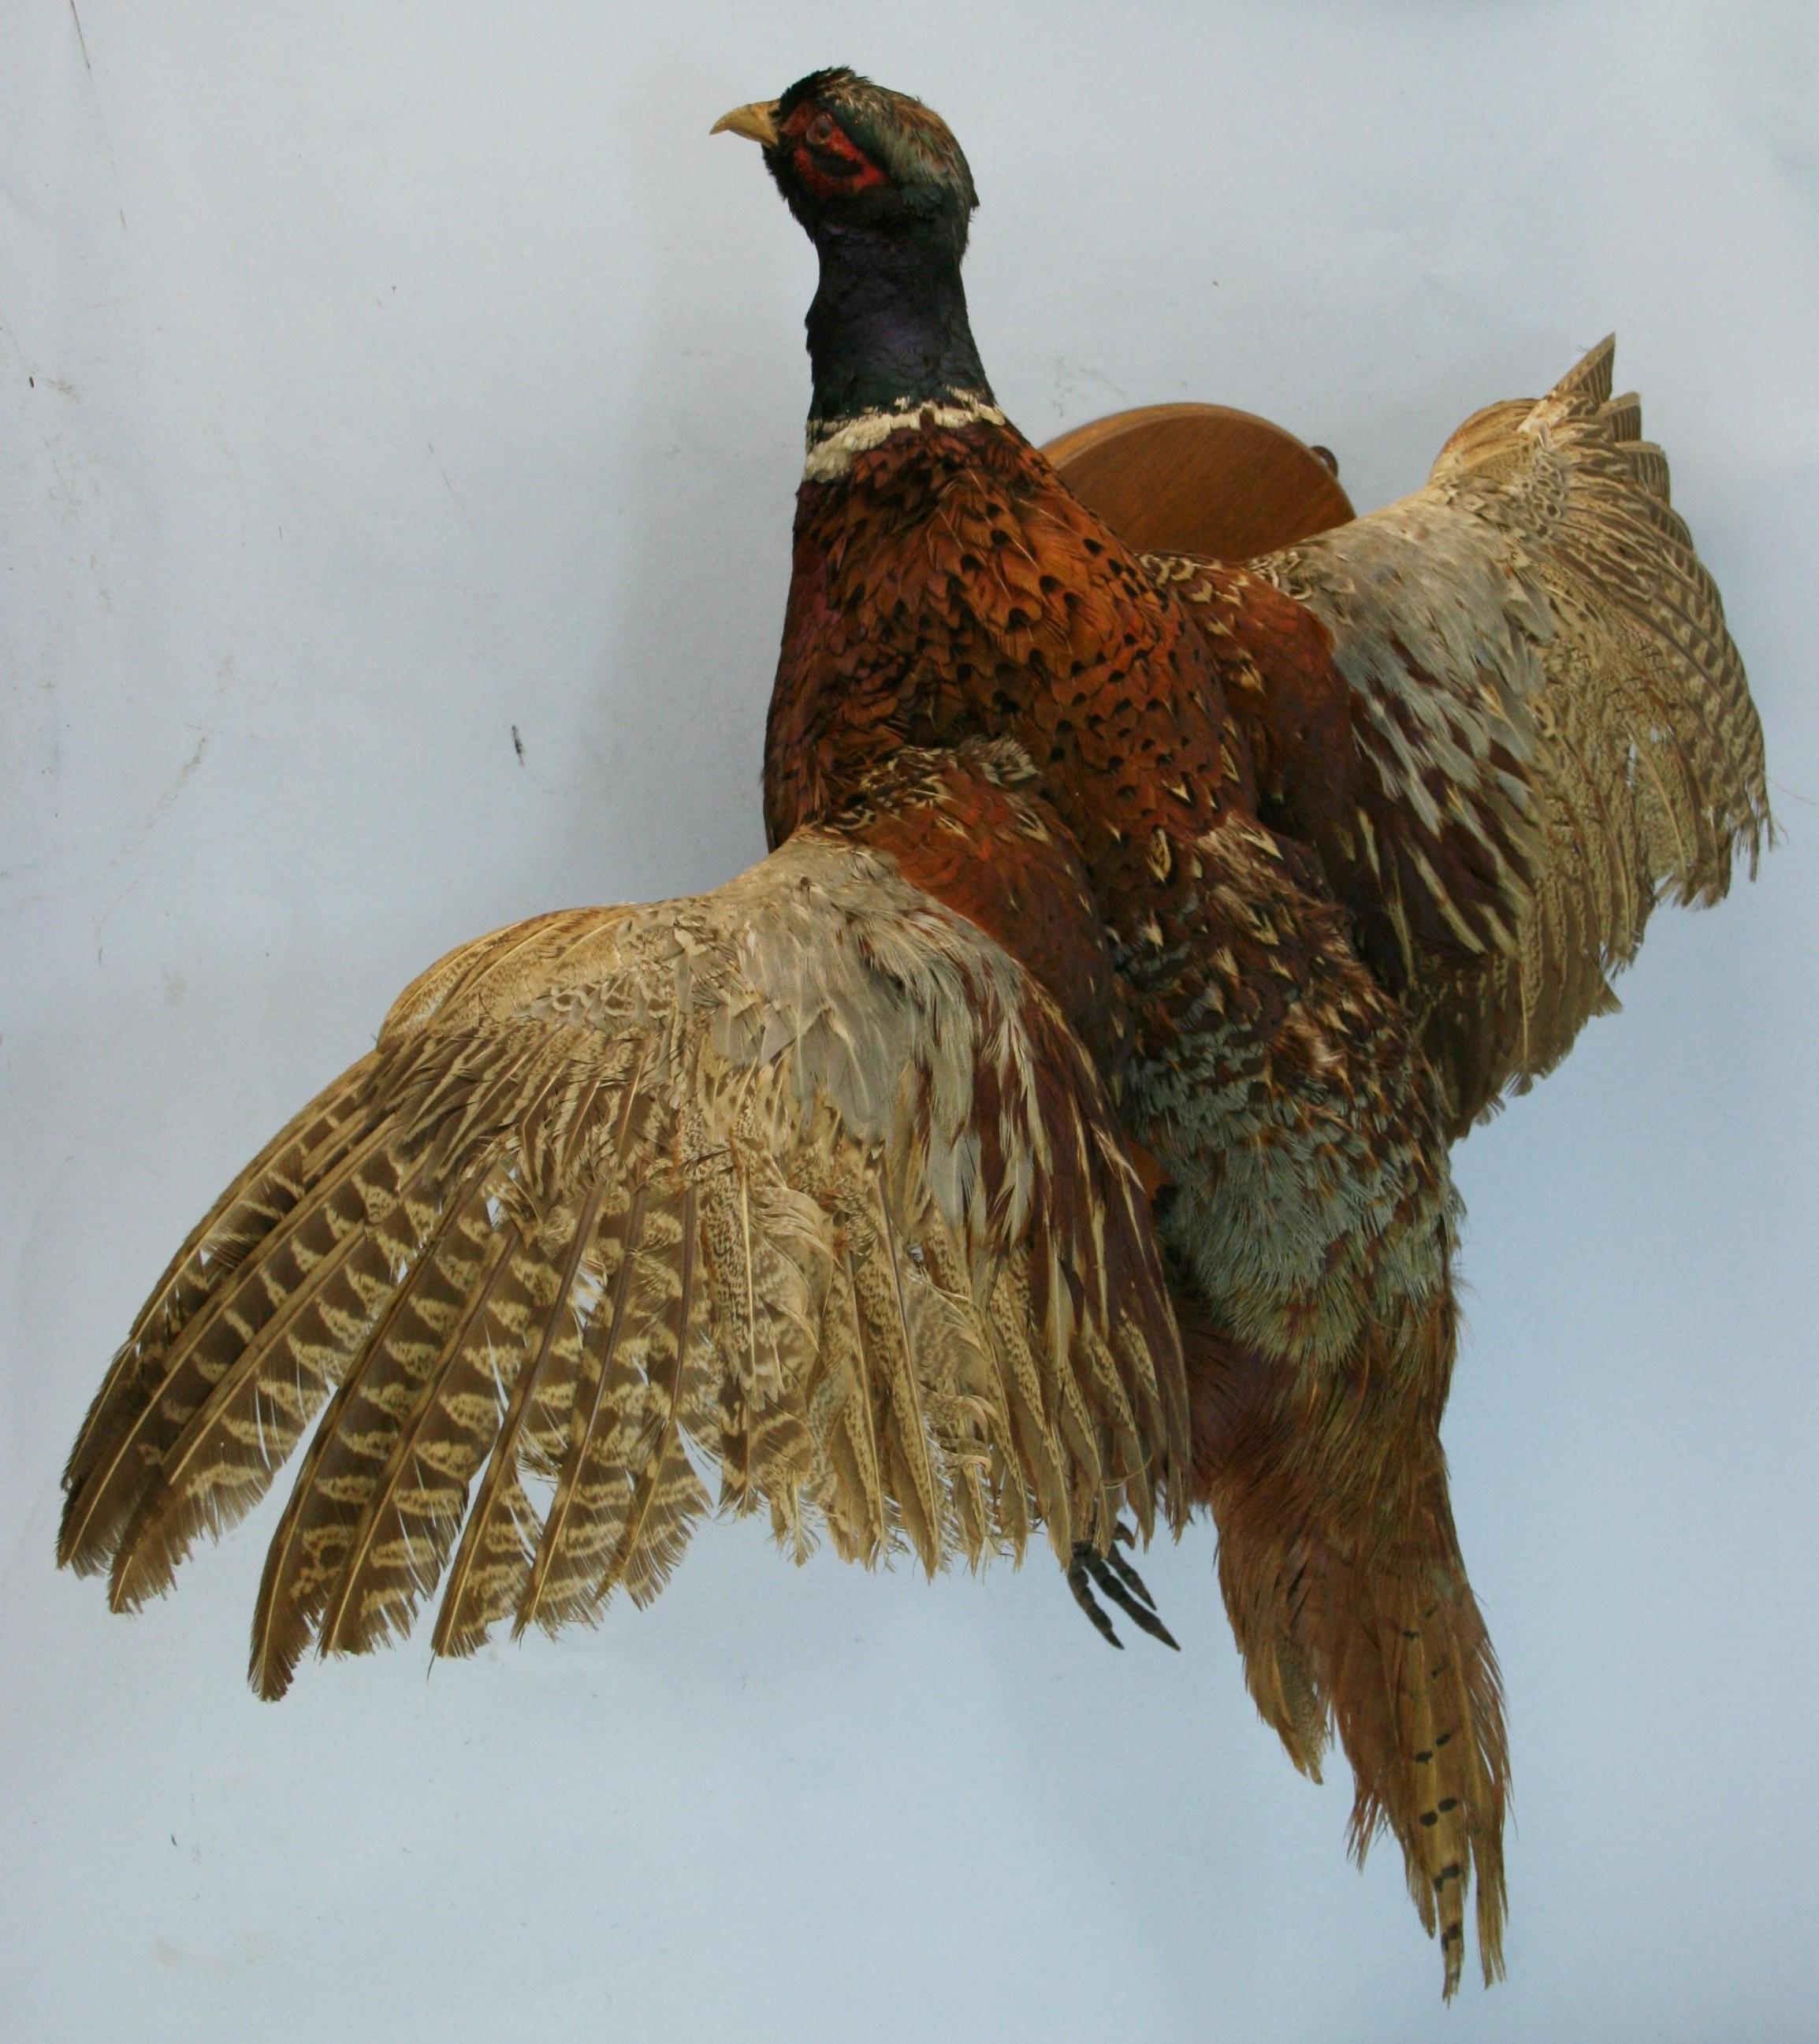 Male Ring tale pheasant taxidermy.
Mounted on wood wall plaque.